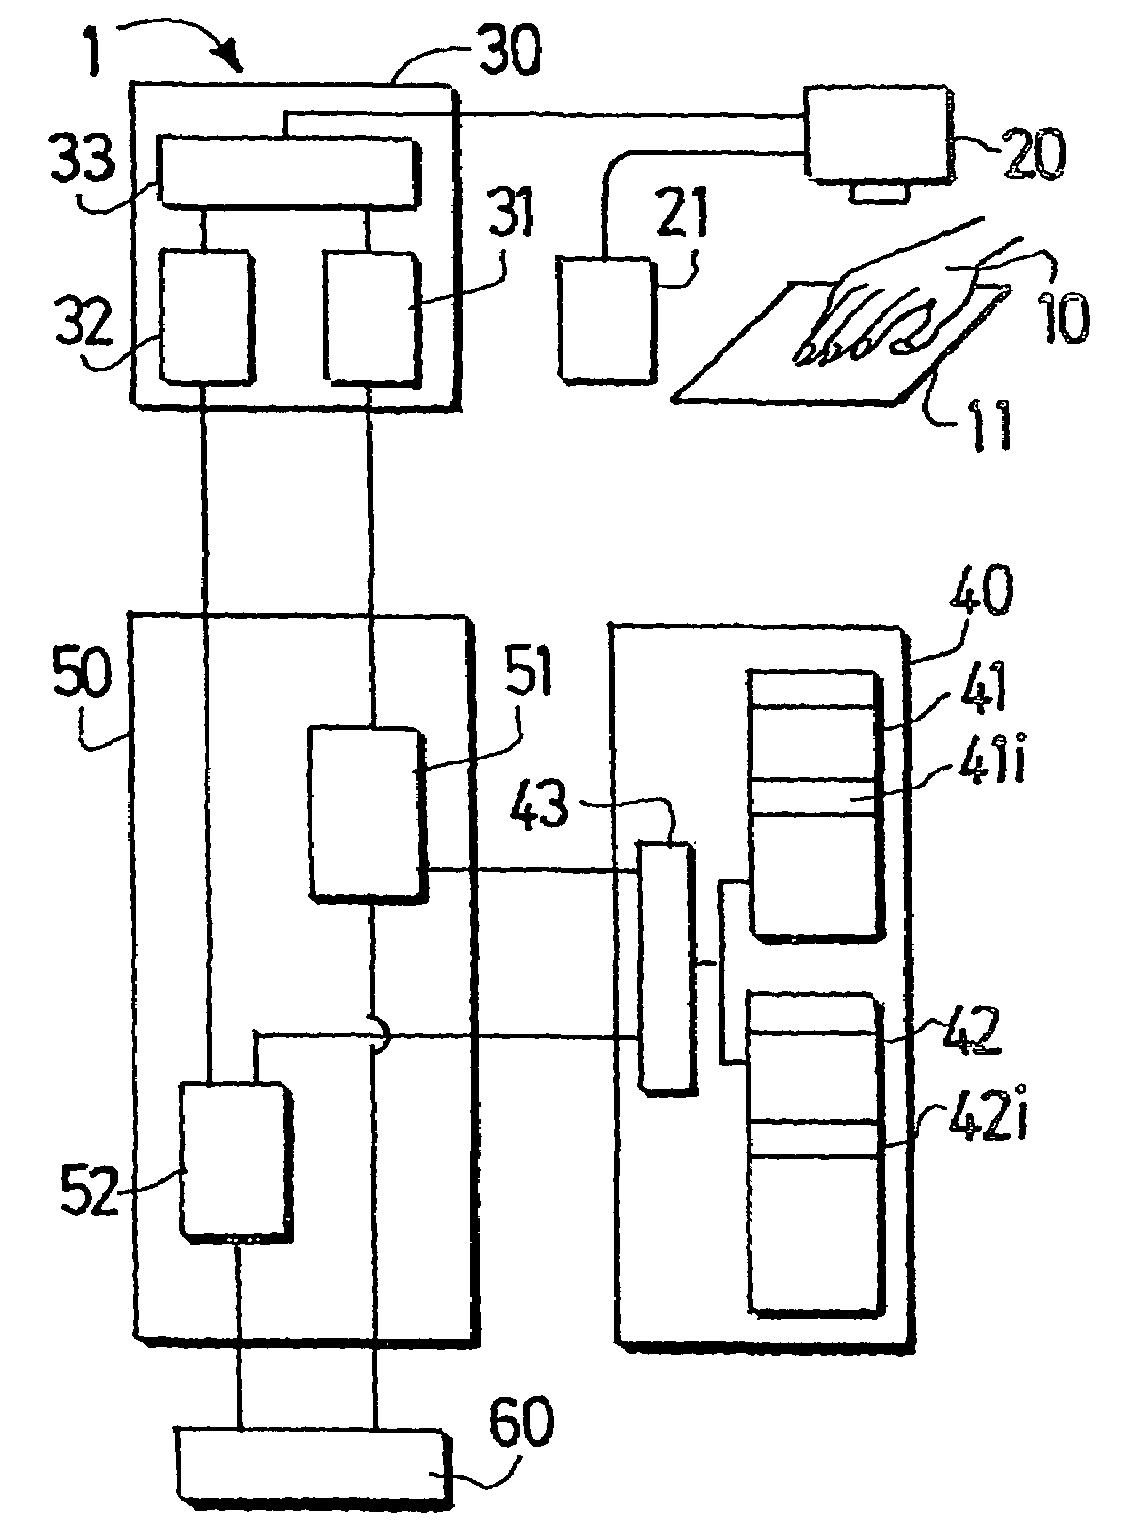 Method for identifying persons and system for carrying out said method